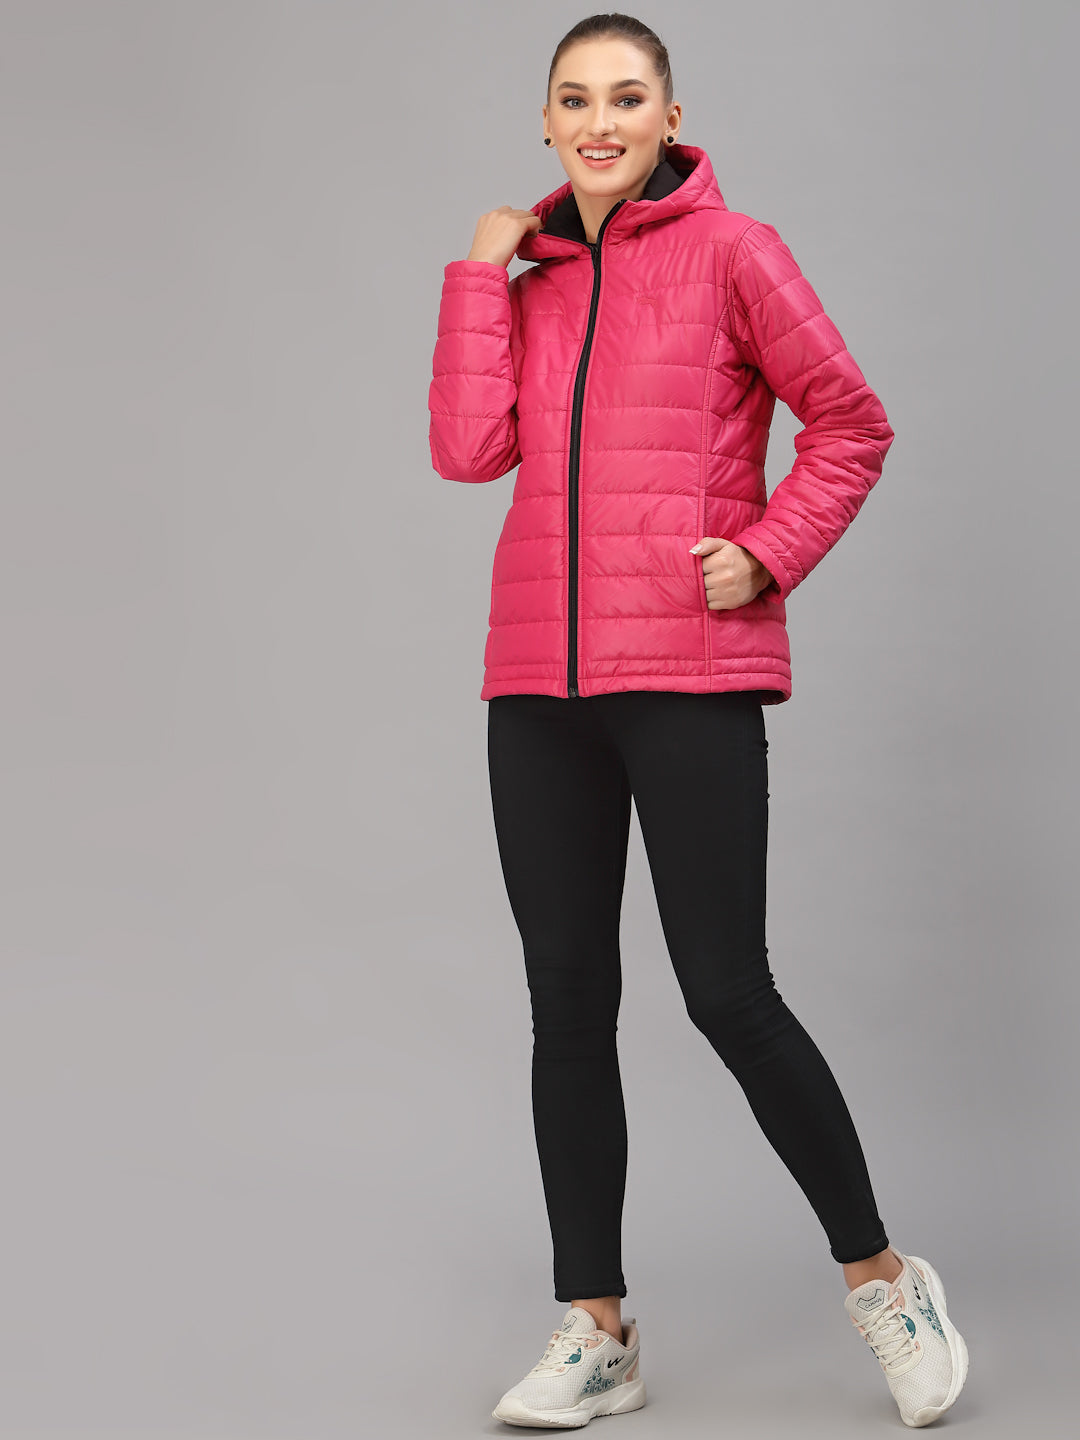 JUMP USA Women Solid Active Wear Jacket With Hood